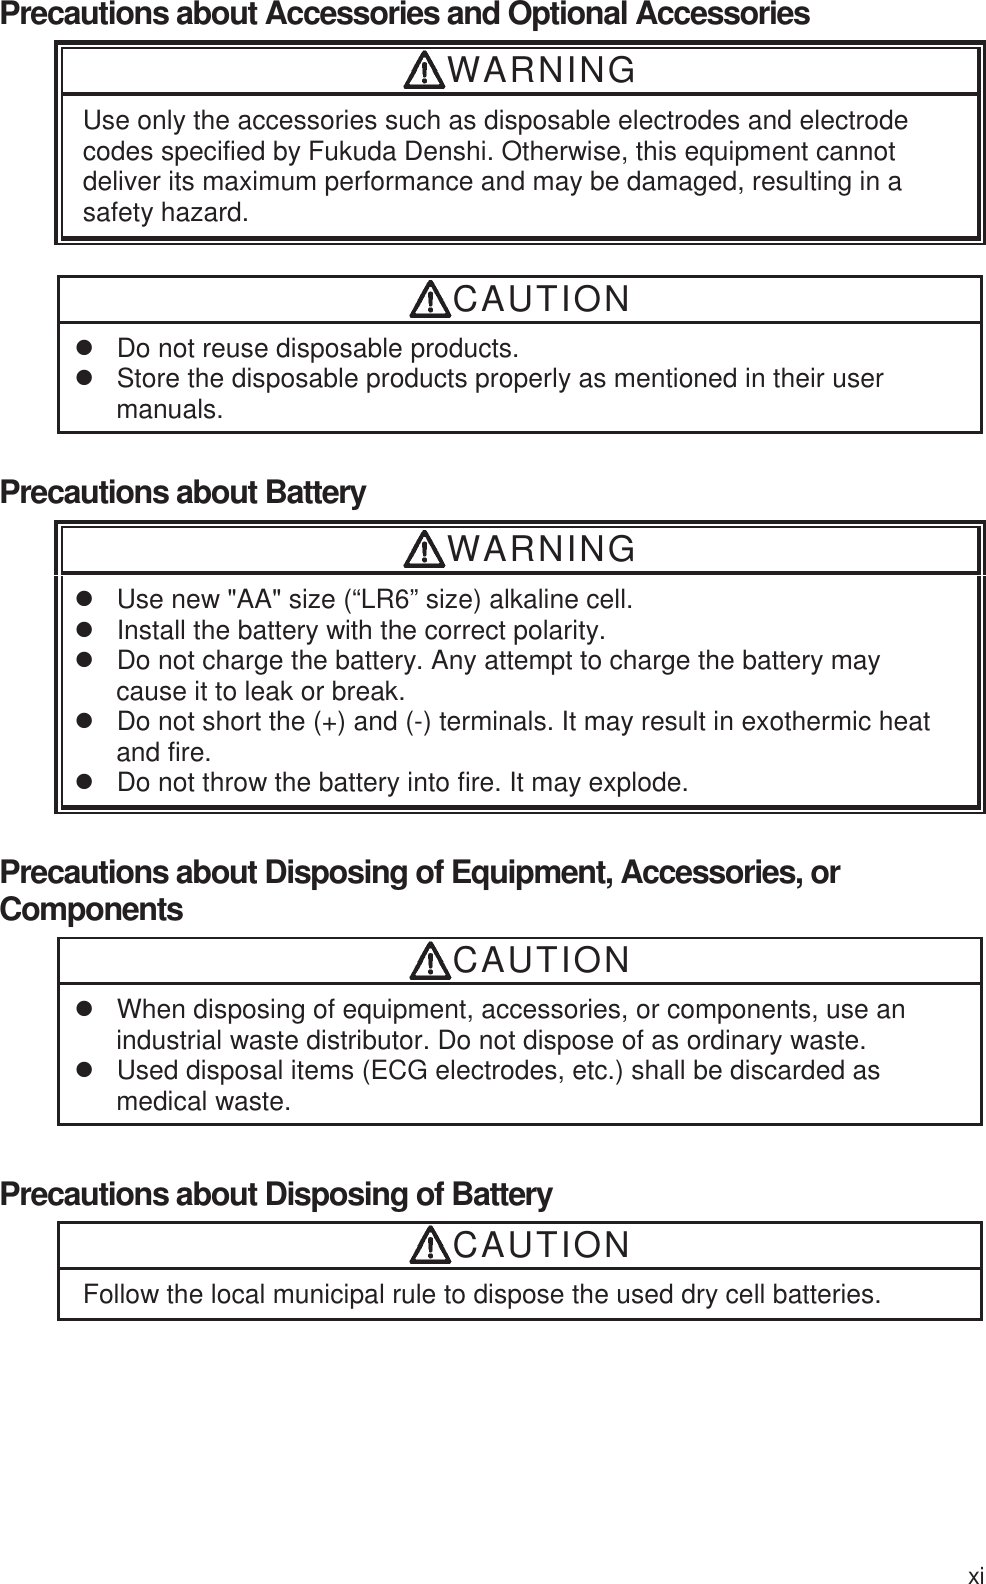 xi Precautions about Accessories and Optional Accessories WARNING Use only the accessories such as disposable electrodes and electrode codes specified by Fukuda Denshi. Otherwise, this equipment cannot deliver its maximum performance and may be damaged, resulting in a safety hazard.  CAUTION z  Do not reuse disposable products.   z  Store the disposable products properly as mentioned in their user manuals.  Precautions about Battery WARNING z  Use new &quot;AA&quot; size (“LR6” size) alkaline cell. z  Install the battery with the correct polarity. z  Do not charge the battery. Any attempt to charge the battery may cause it to leak or break. z  Do not short the (+) and (-) terminals. It may result in exothermic heat and fire. z  Do not throw the battery into fire. It may explode.  Precautions about Disposing of Equipment, Accessories, or Components CAUTION z  When disposing of equipment, accessories, or components, use an industrial waste distributor. Do not dispose of as ordinary waste. z  Used disposal items (ECG electrodes, etc.) shall be discarded as medical waste. Precautions about Disposing of Battery CAUTION Follow the local municipal rule to dispose the used dry cell batteries.   